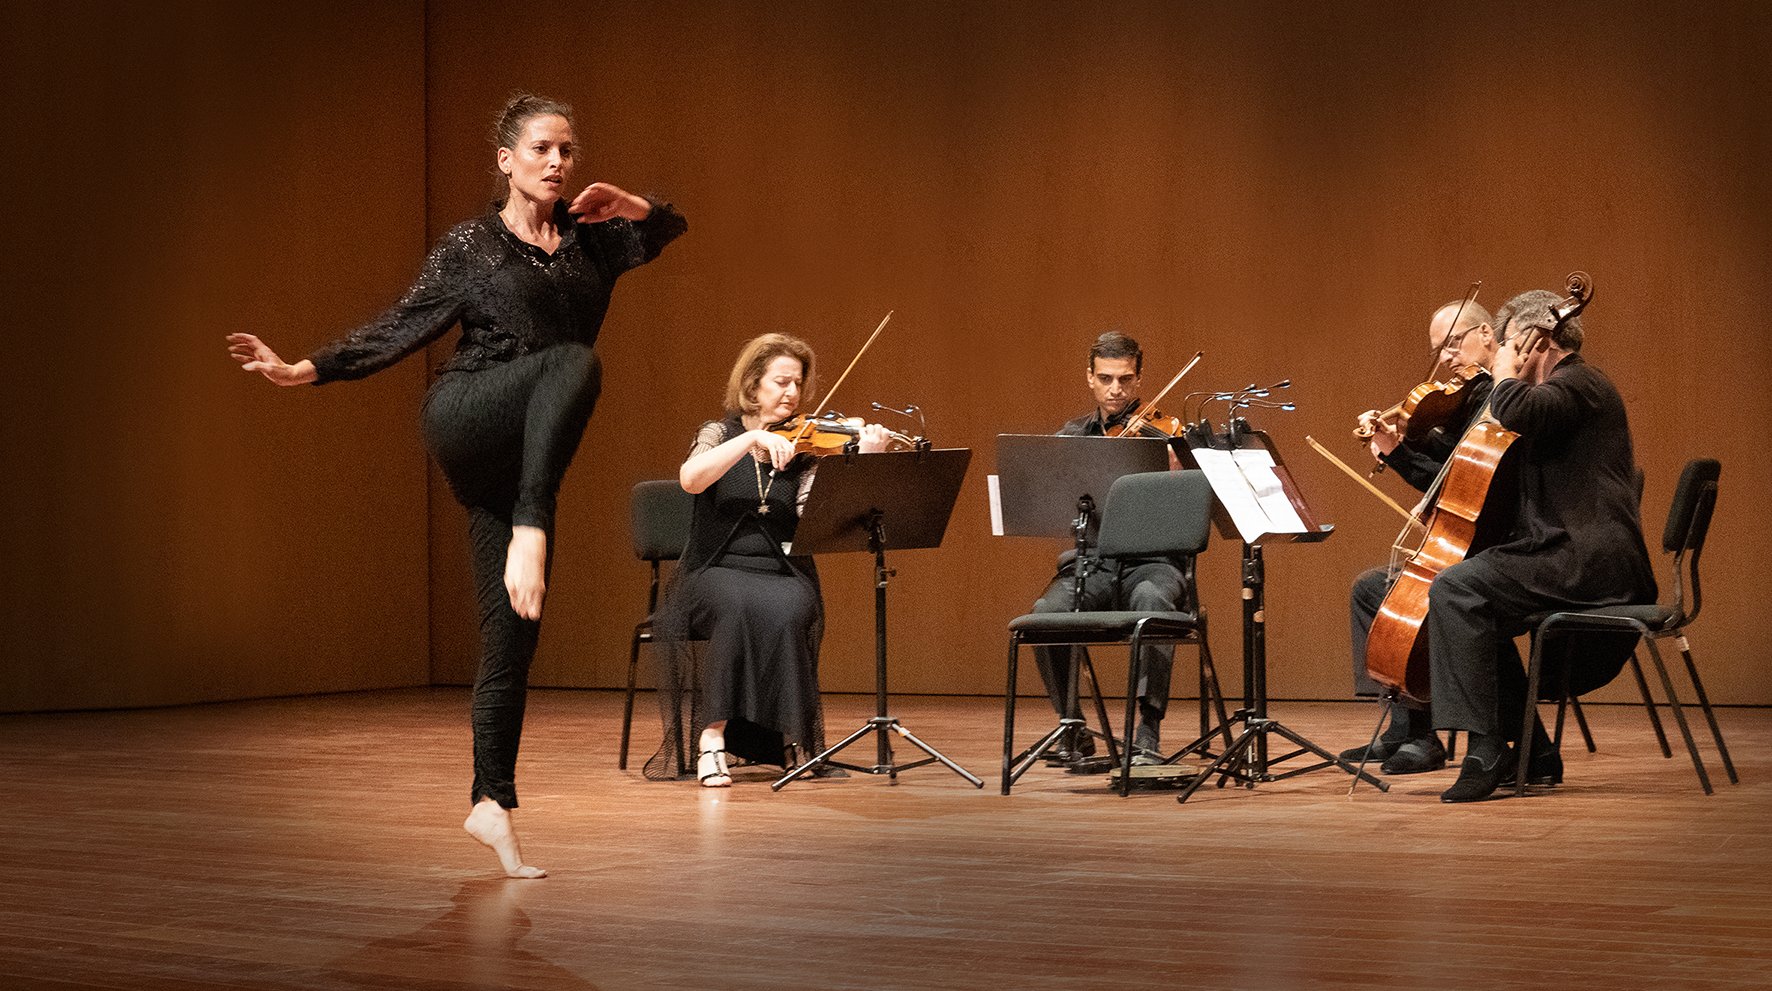 Renana Raz passionately integrates the energy of chamber music into her choreography in “16 Strings and One Body”.